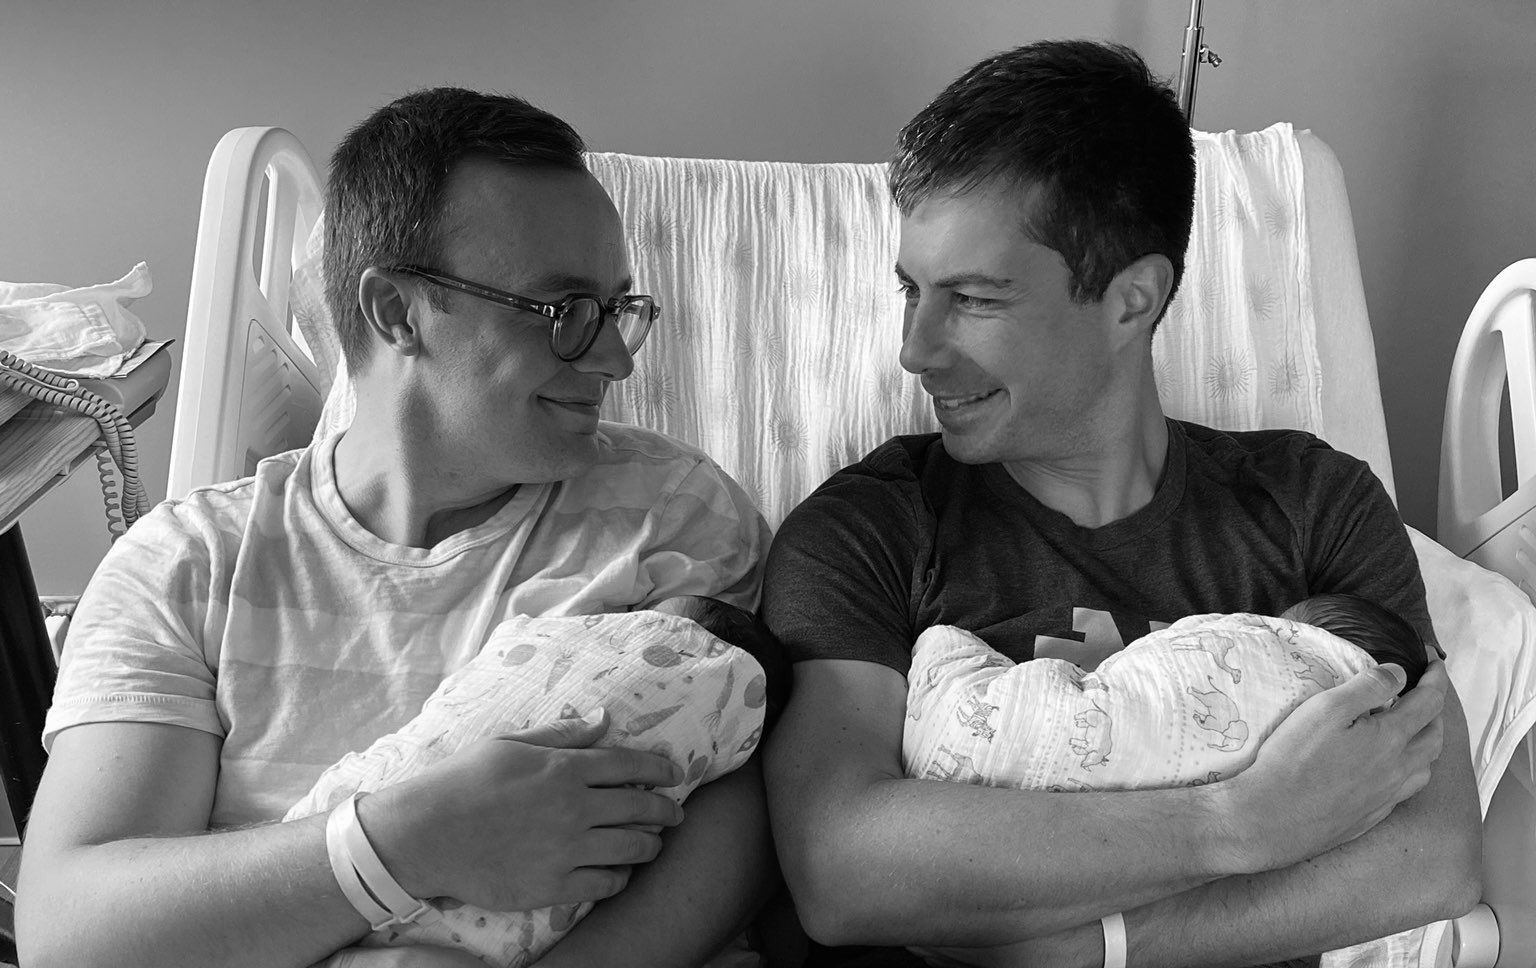 Image of Pete Buttigieg and his husband Chasten holding their new babies.